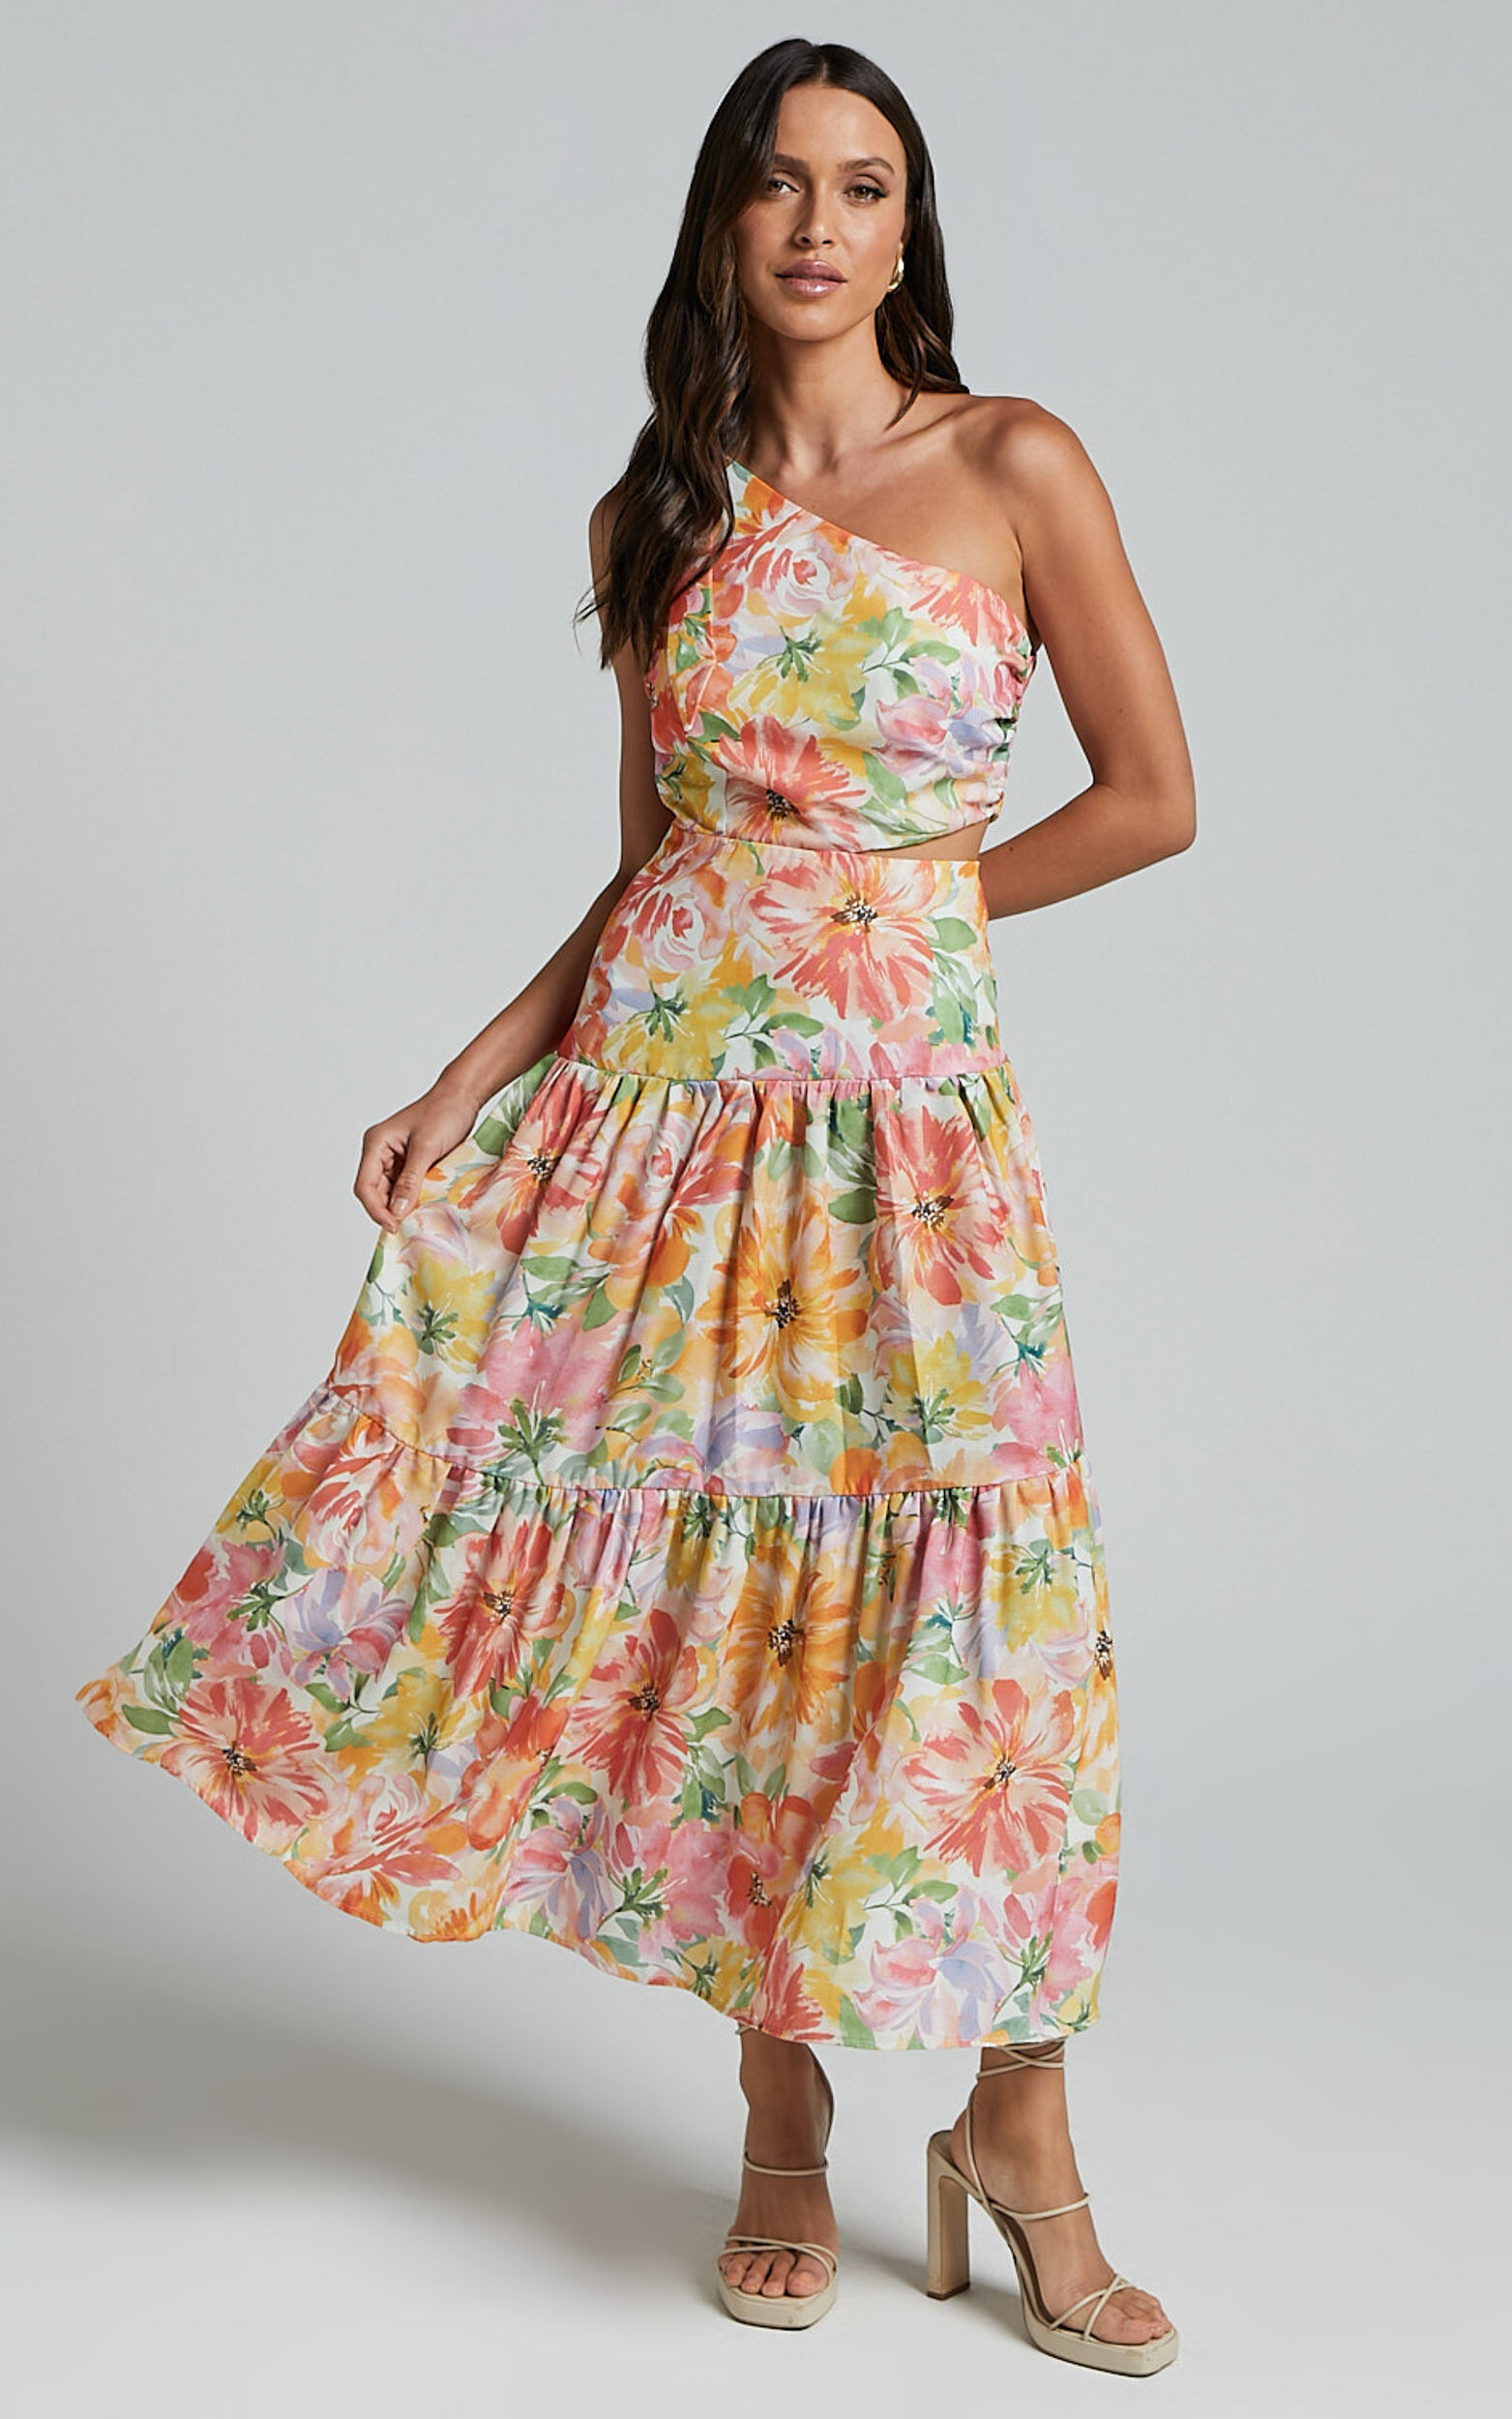 Mitzy Midi Dress - One Shoulder Cut Out Tiered Dress in Summer Floral - 06, ORG1